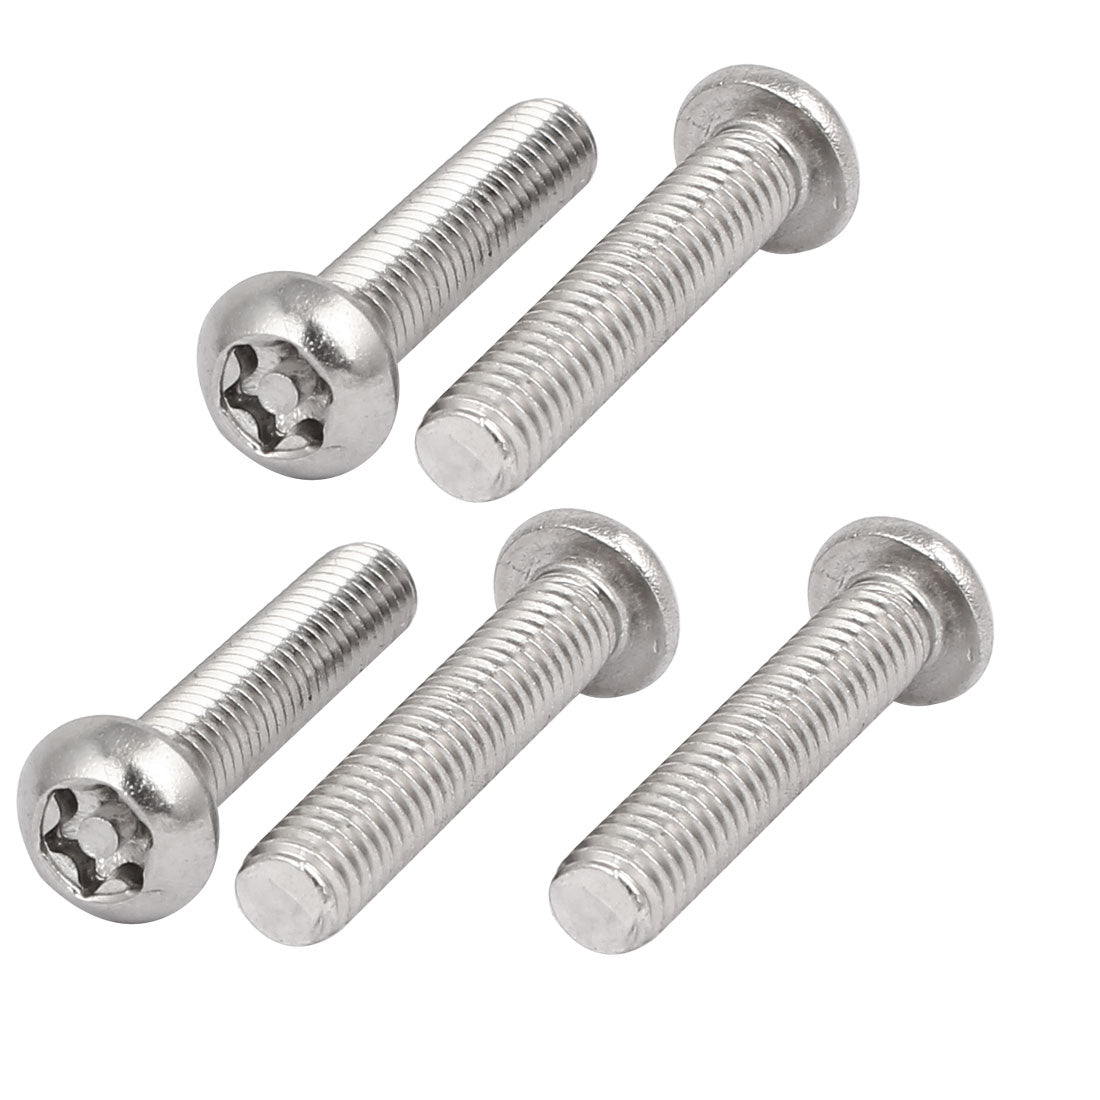 uxcell Uxcell M6x30mm 304 Stainless Steel Button Head Torx Security Tamper Proof Screws 5pcs